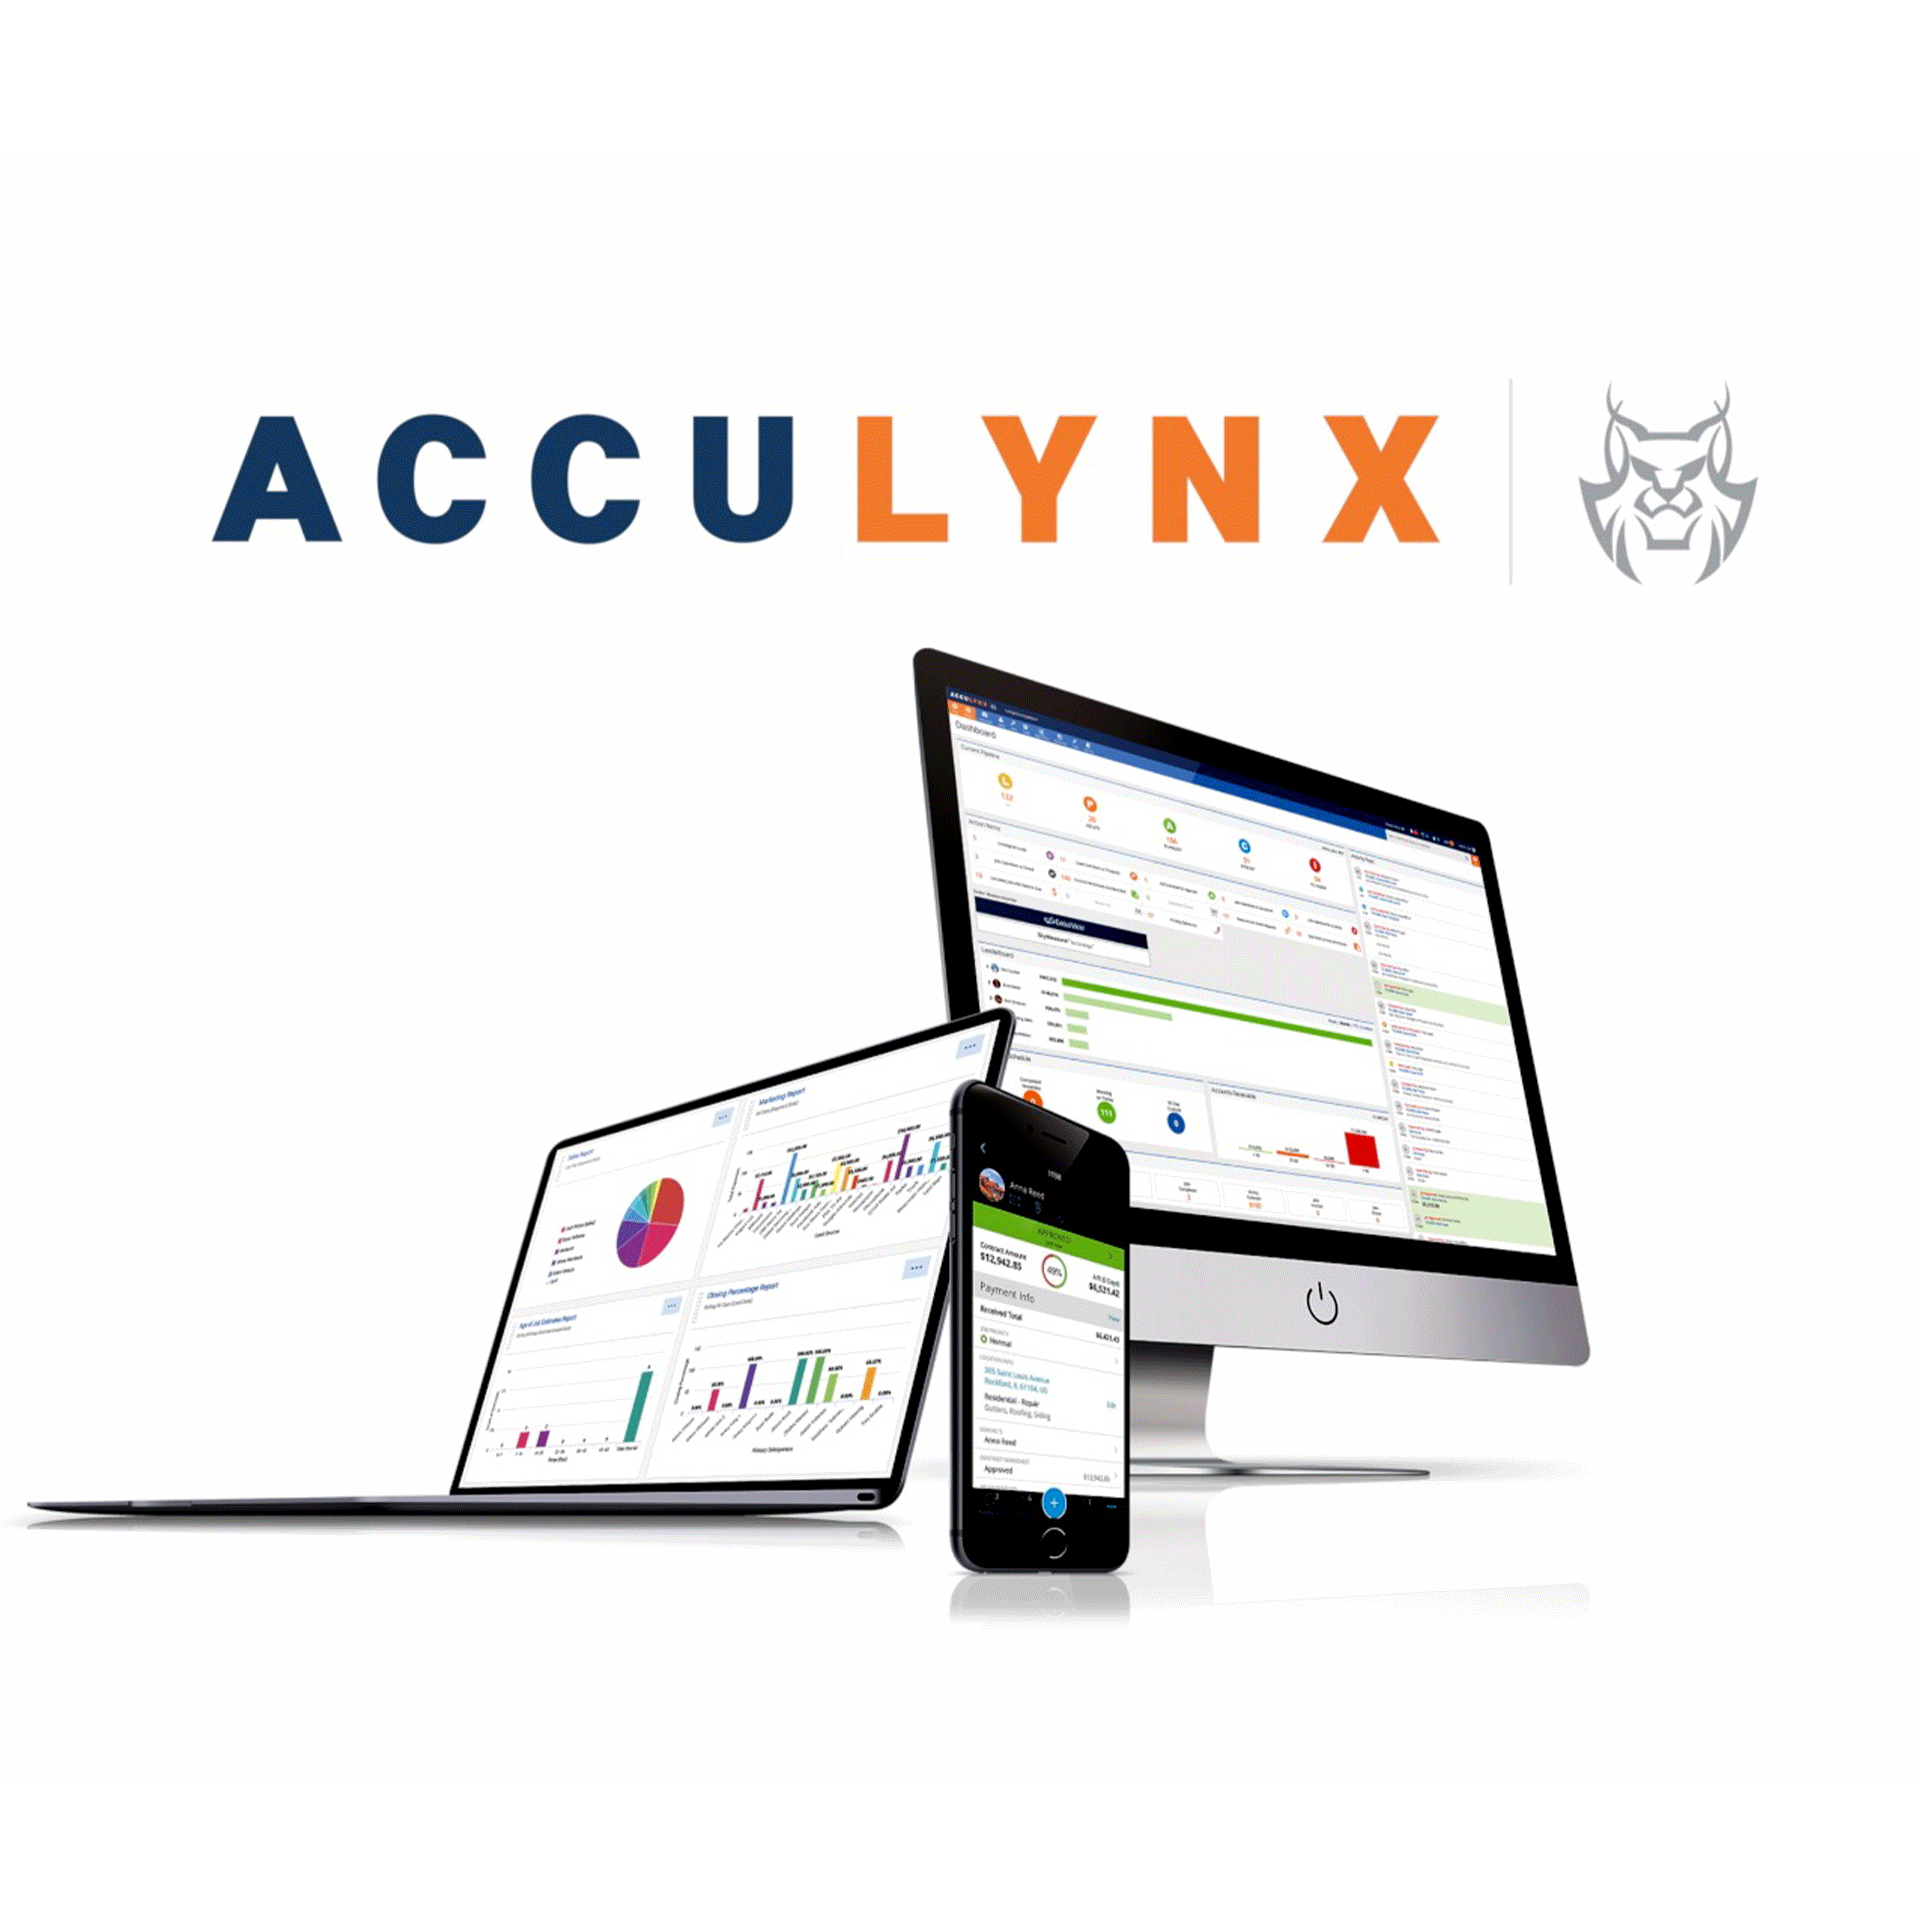 Acculynx dashboard on a mobile laptop and desktop